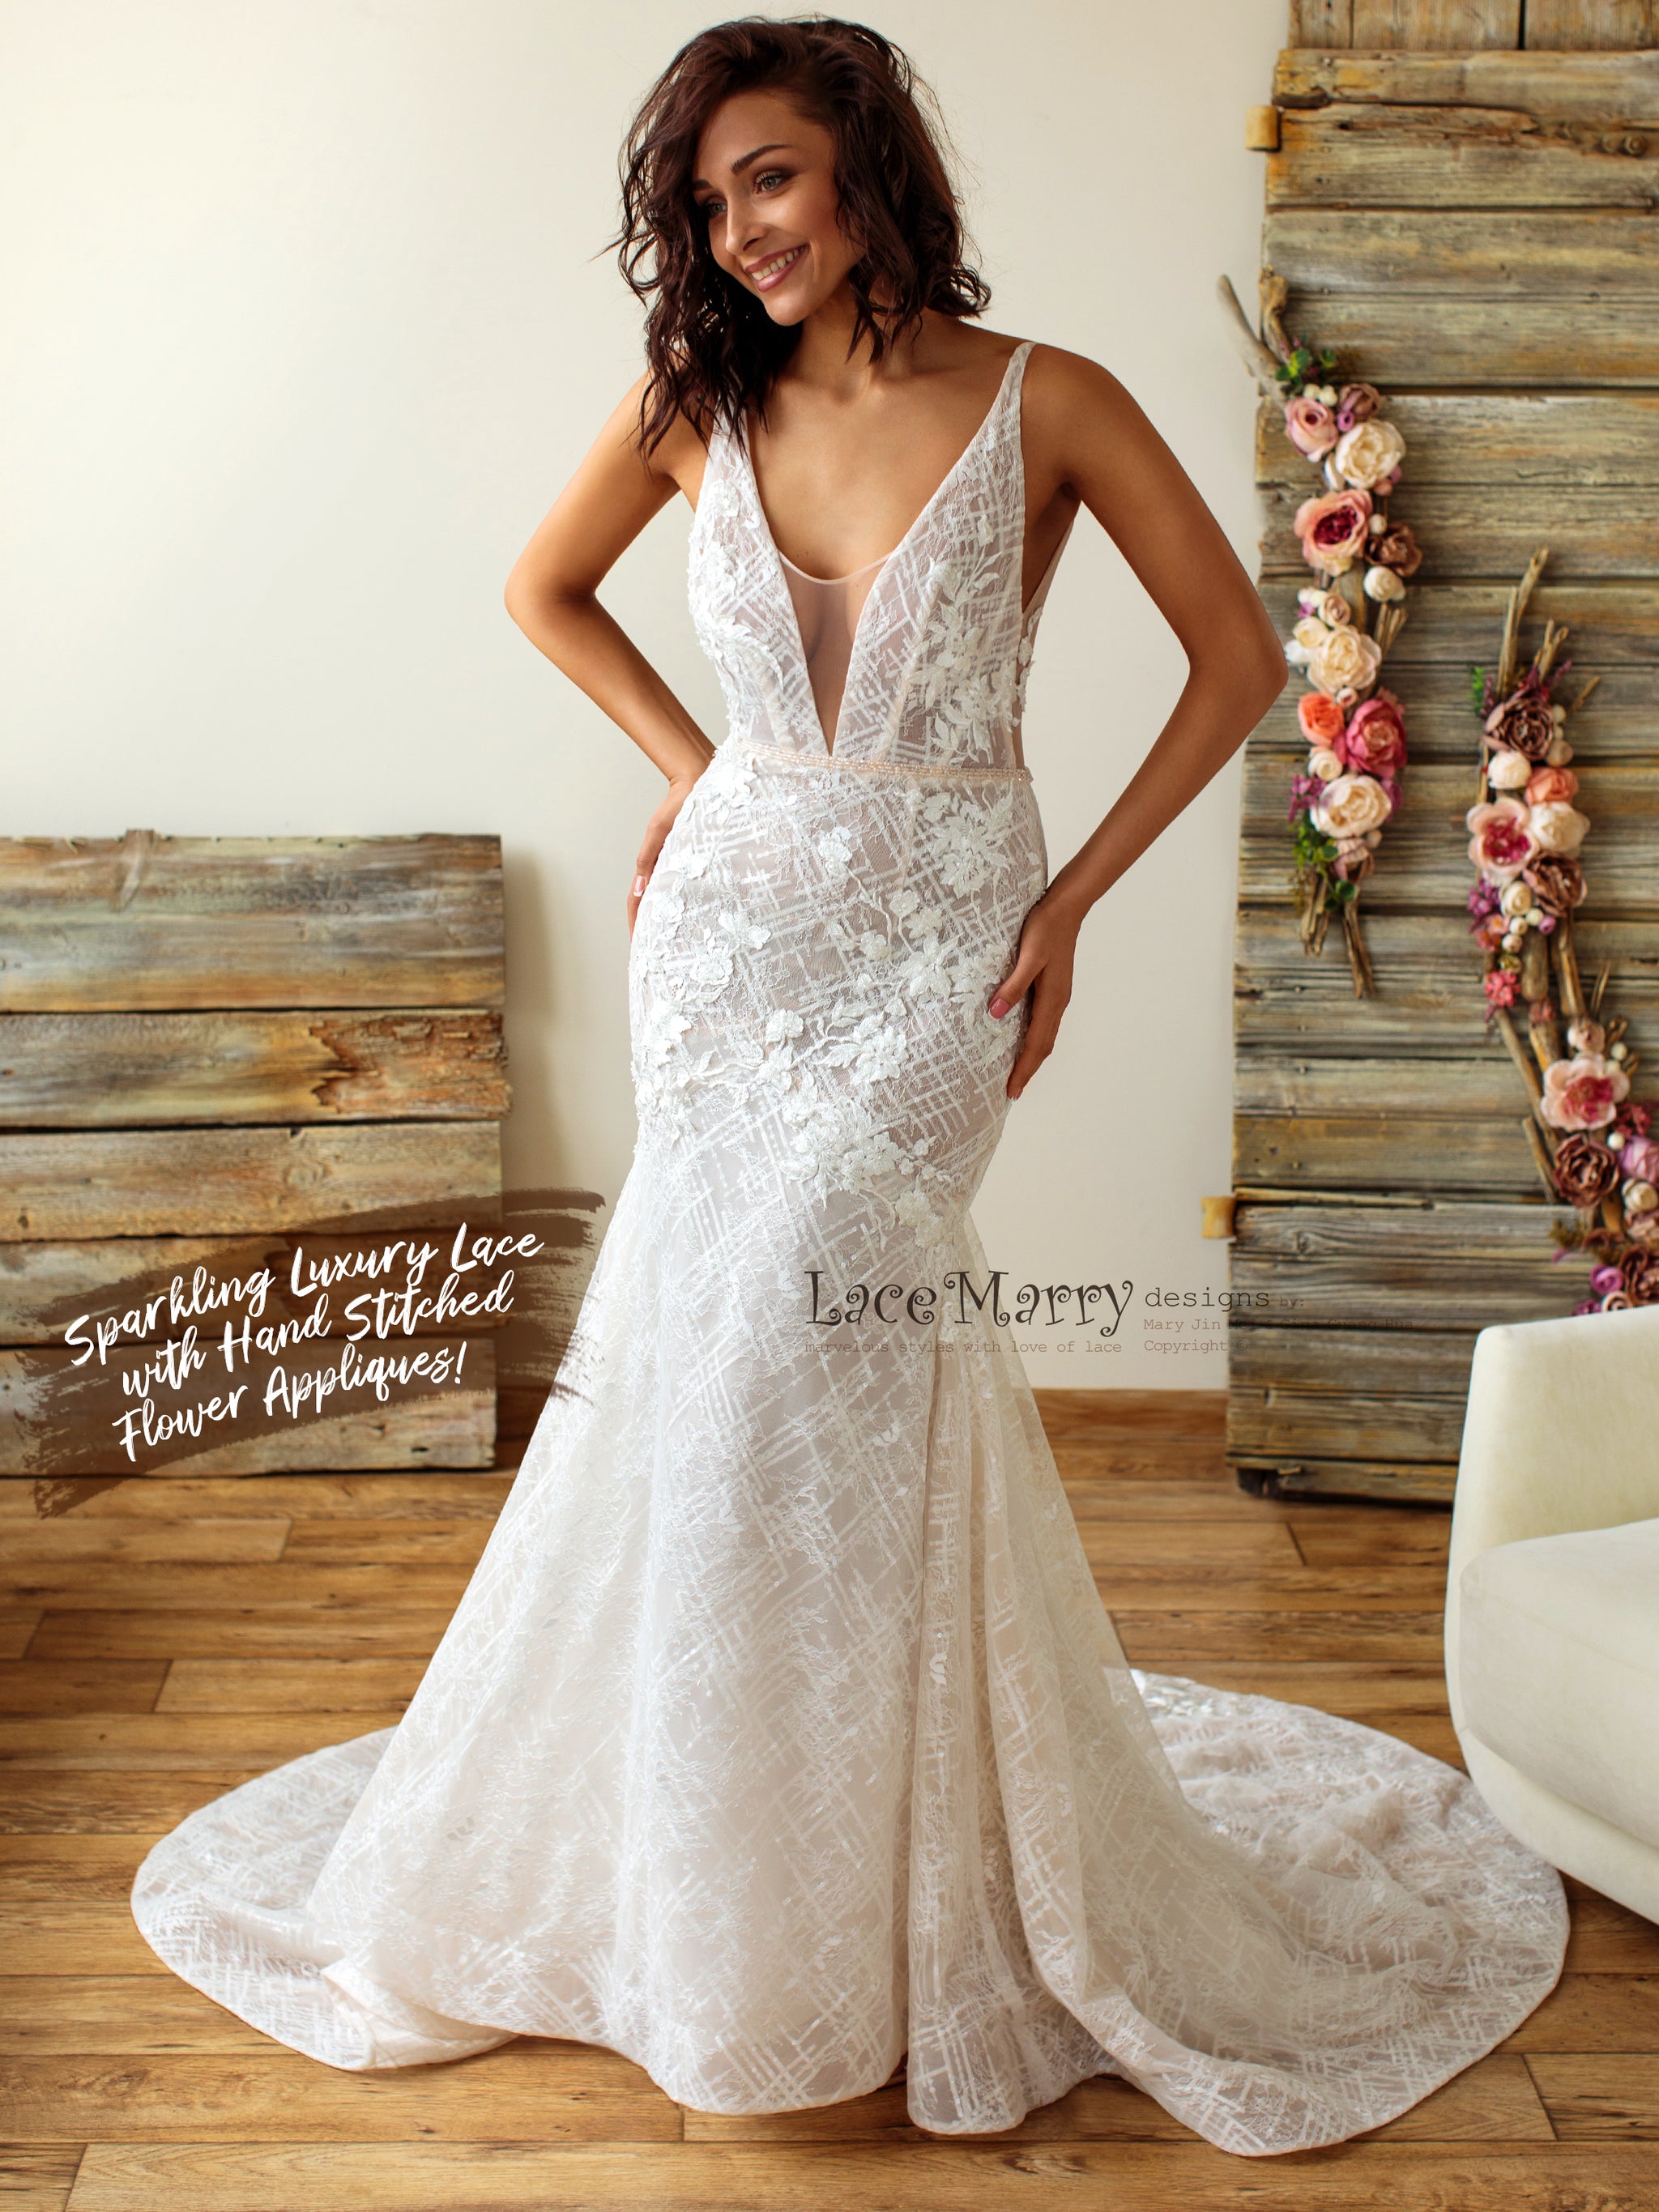 Fancy long gown with geometric designs and bustier bodice